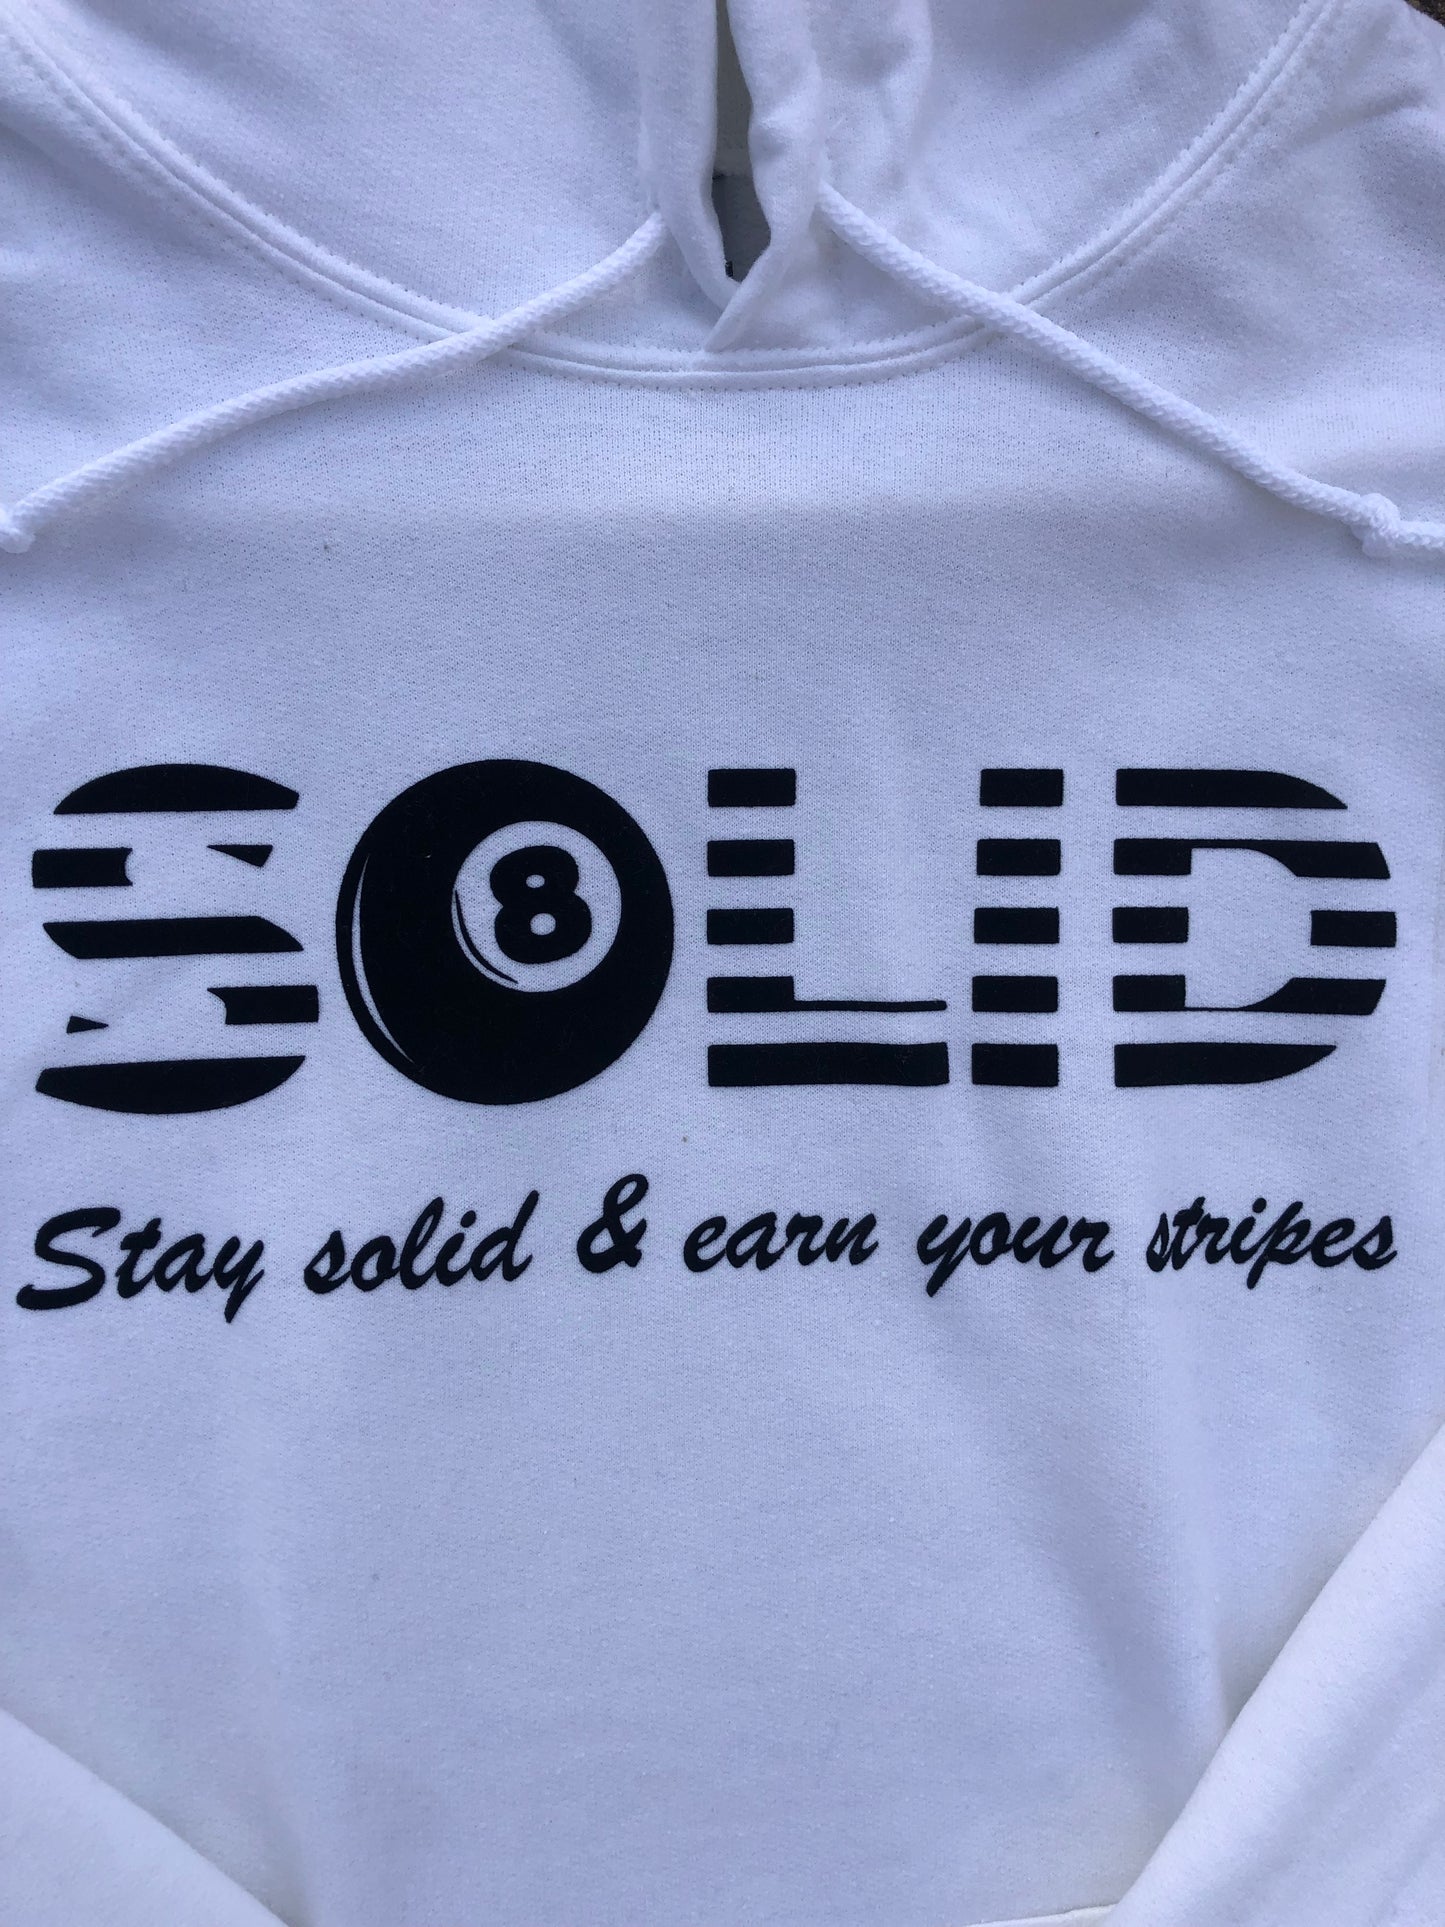 Players Only "SOLID" Hoodie